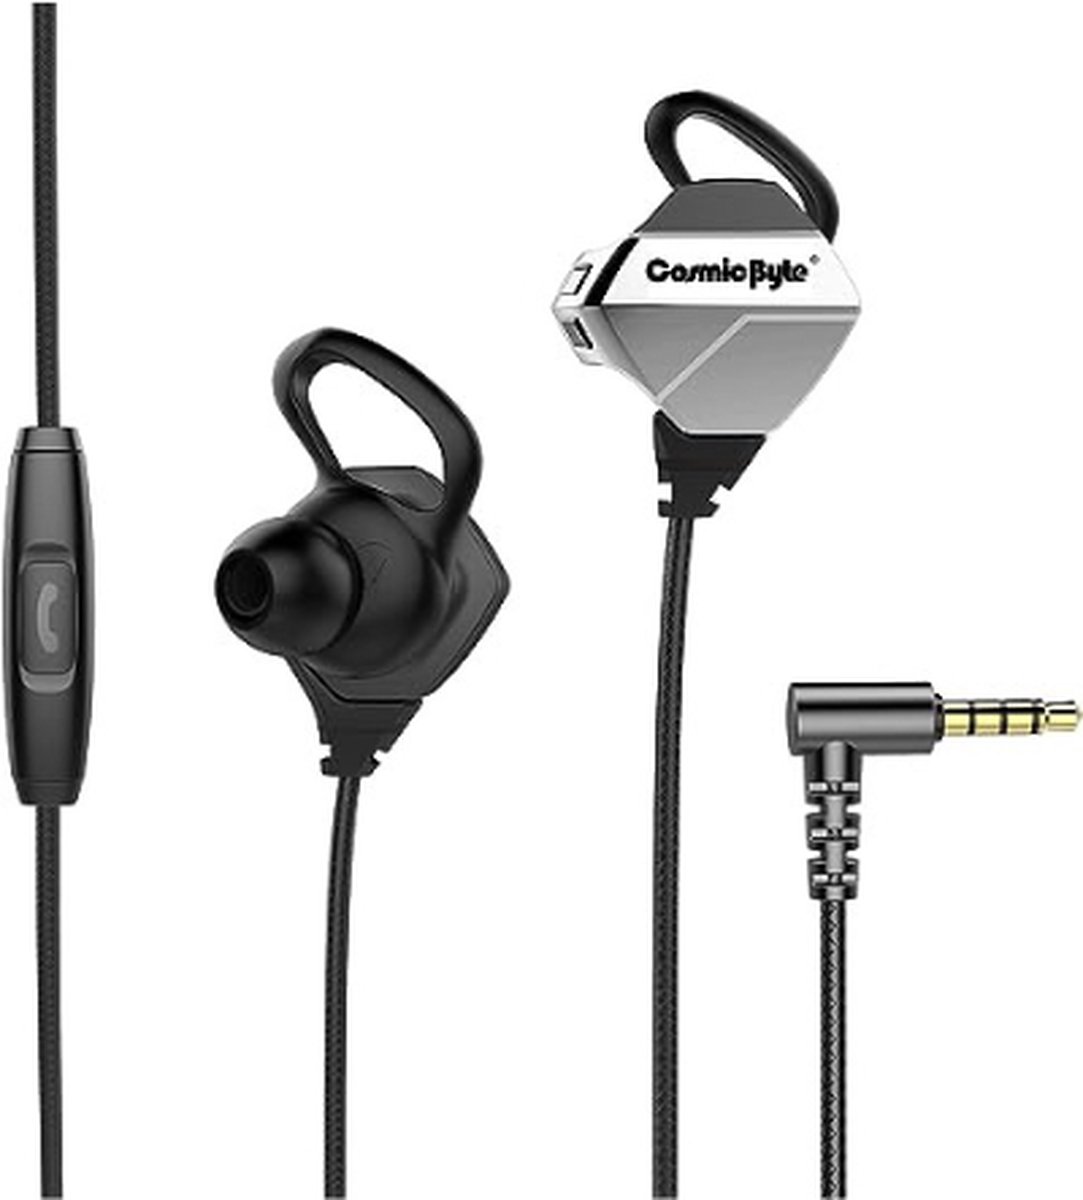 Cosmic Byte CB-EP-04 Gaming Wired in Ear Earphone with Microphone Detachable for PC, PS4, Mobiles, Tablets (Black/Silver) Extra Soft Earbud | Adapter & Pouch | High Quality Speakers | Dual Microphone Design